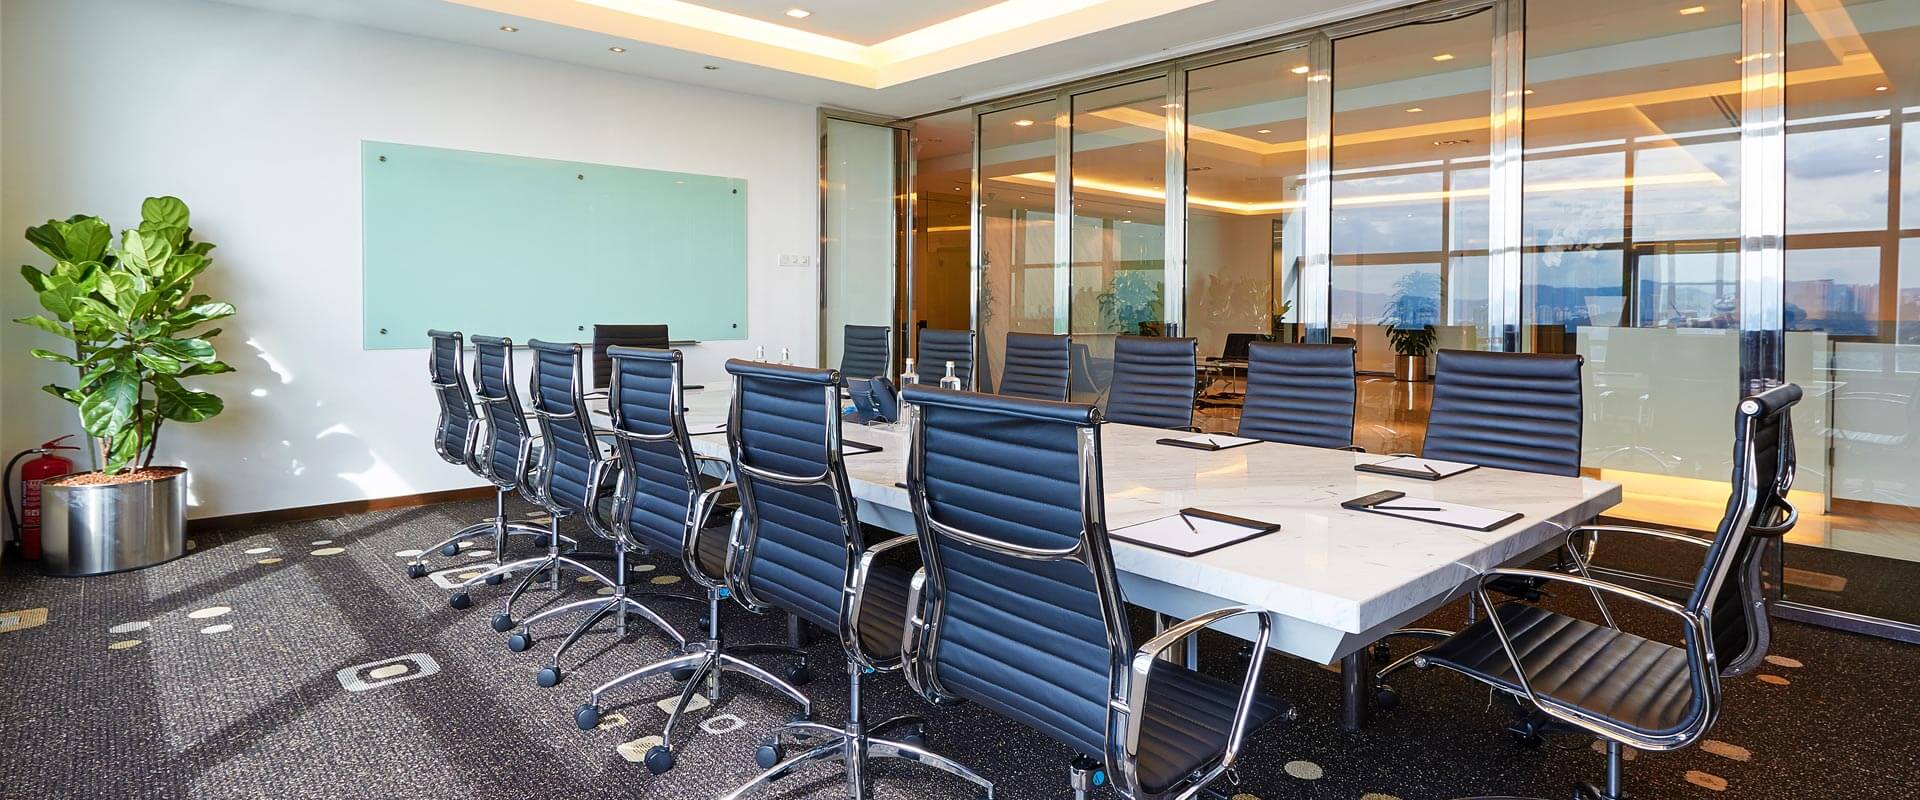 Axiata Tower - Serviced Office, Virtual Office, Coworking ...